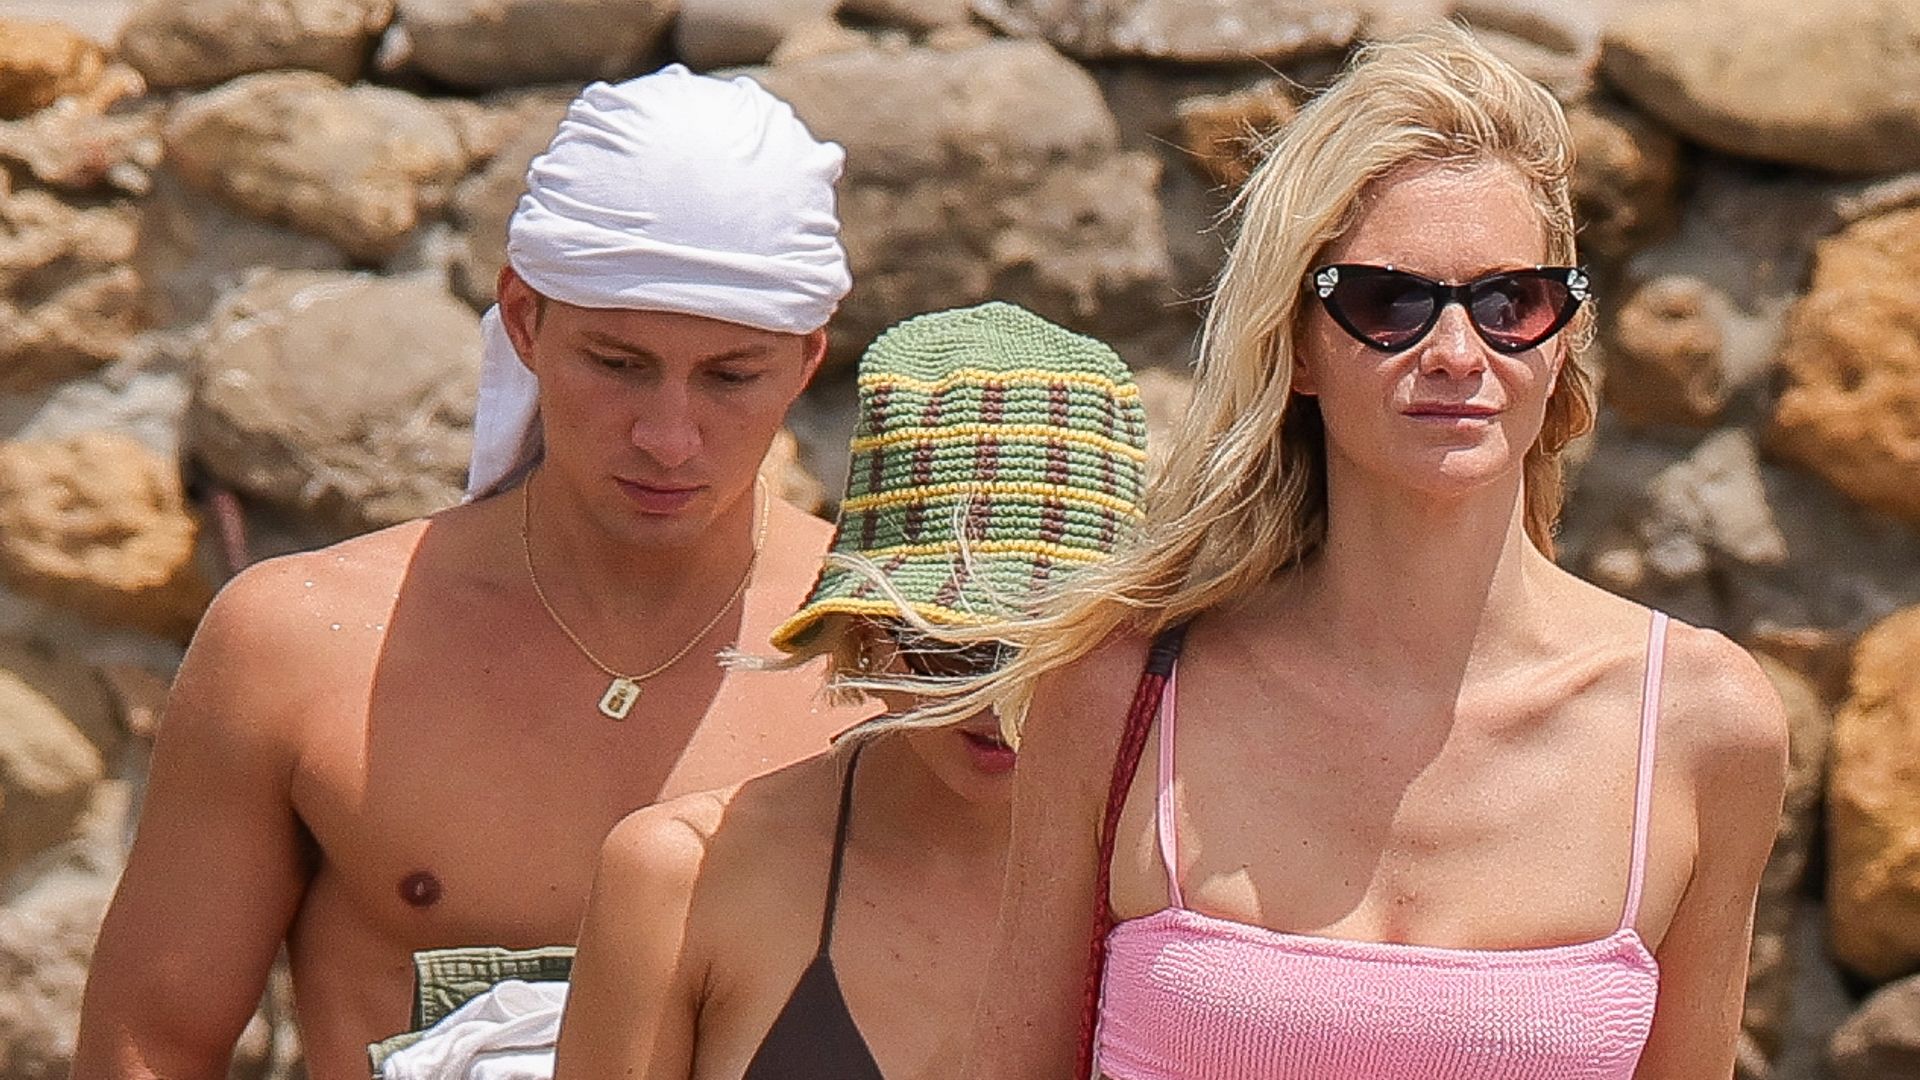 Poppy Delevingne and a shirtless Prince Constantine Alexios walking on a beach